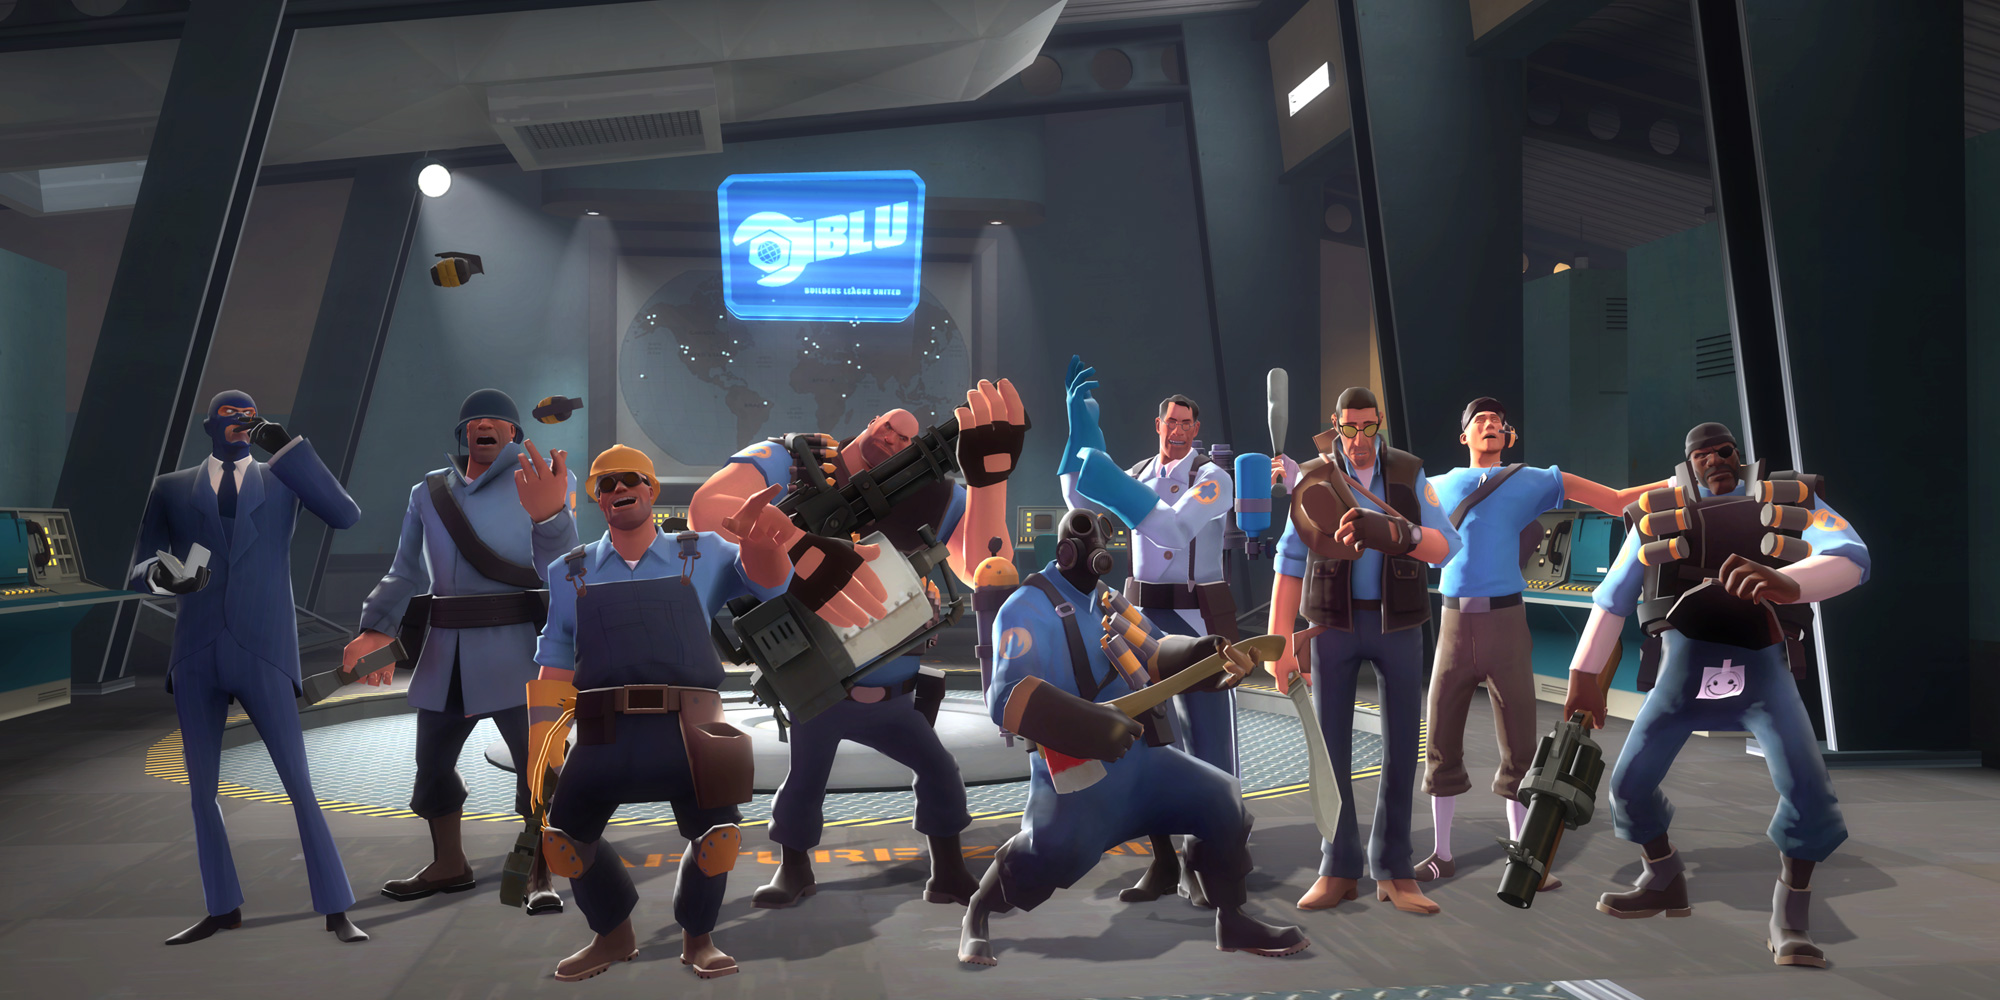 Image 2 of 50. Download Team Fortress 